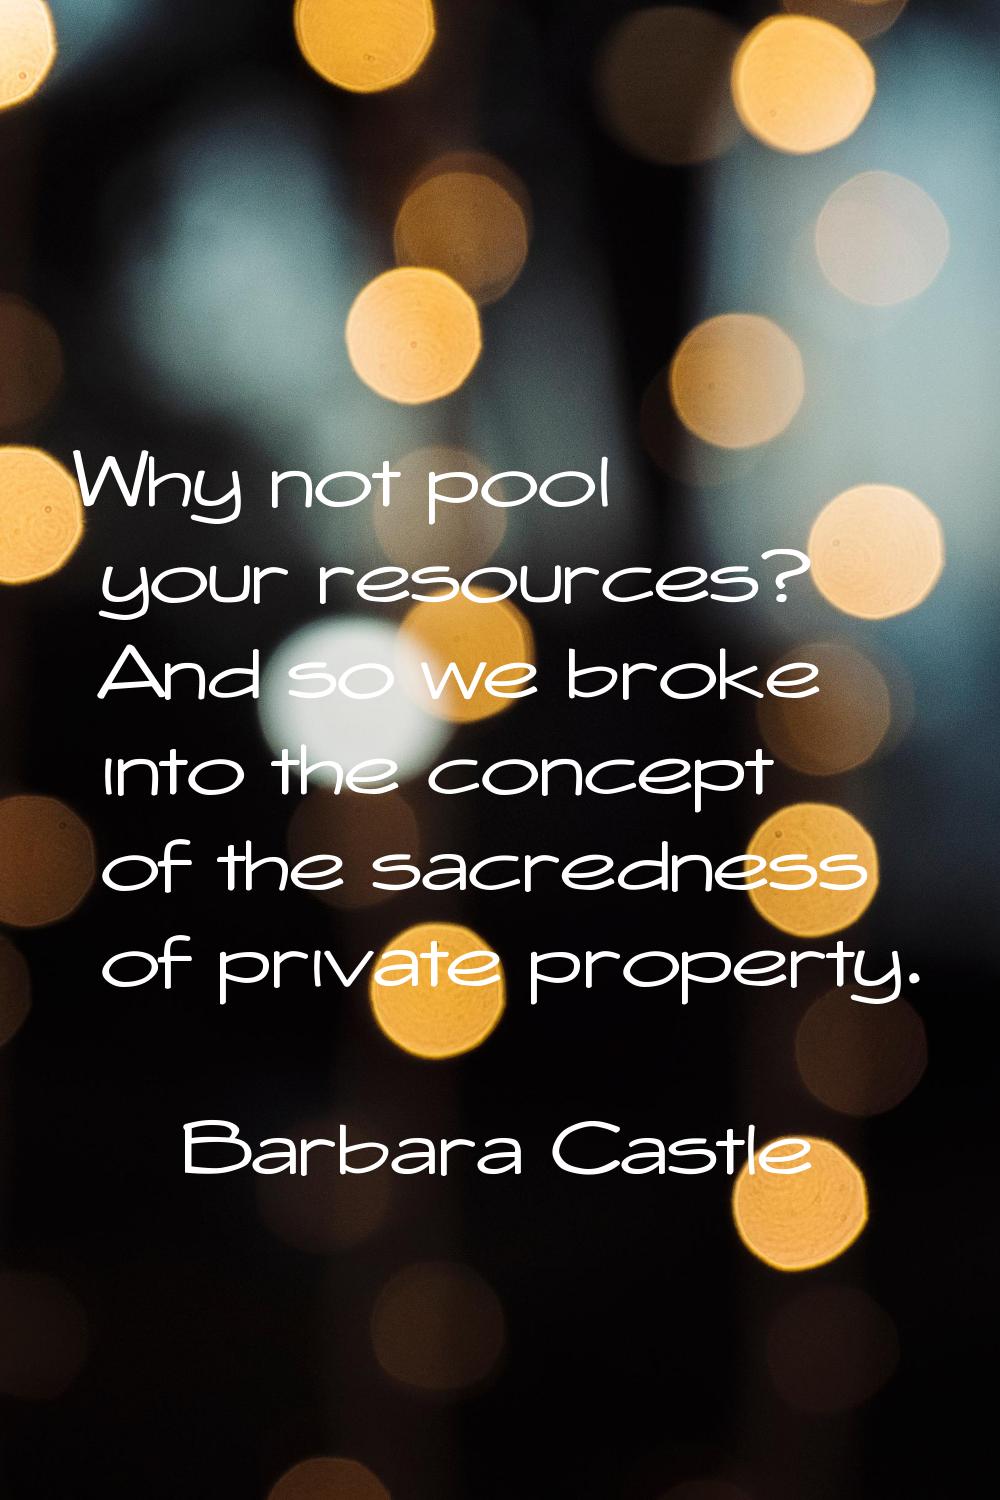 Why not pool your resources? And so we broke into the concept of the sacredness of private property